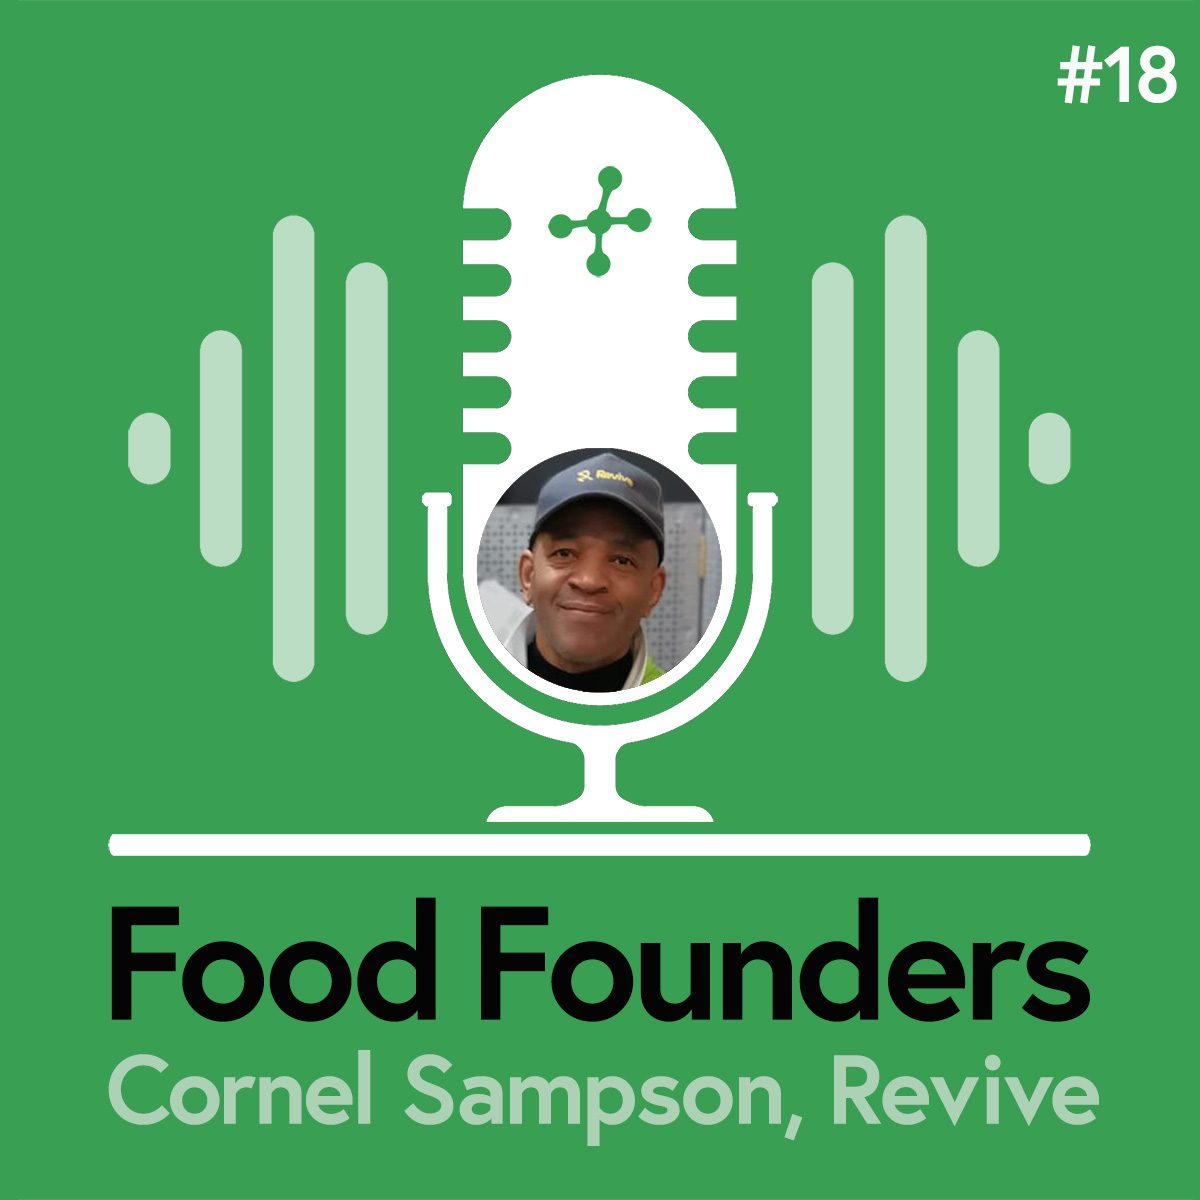 Food Founders Interview Podcast: Ep18 - Cornel Sampson, Revive